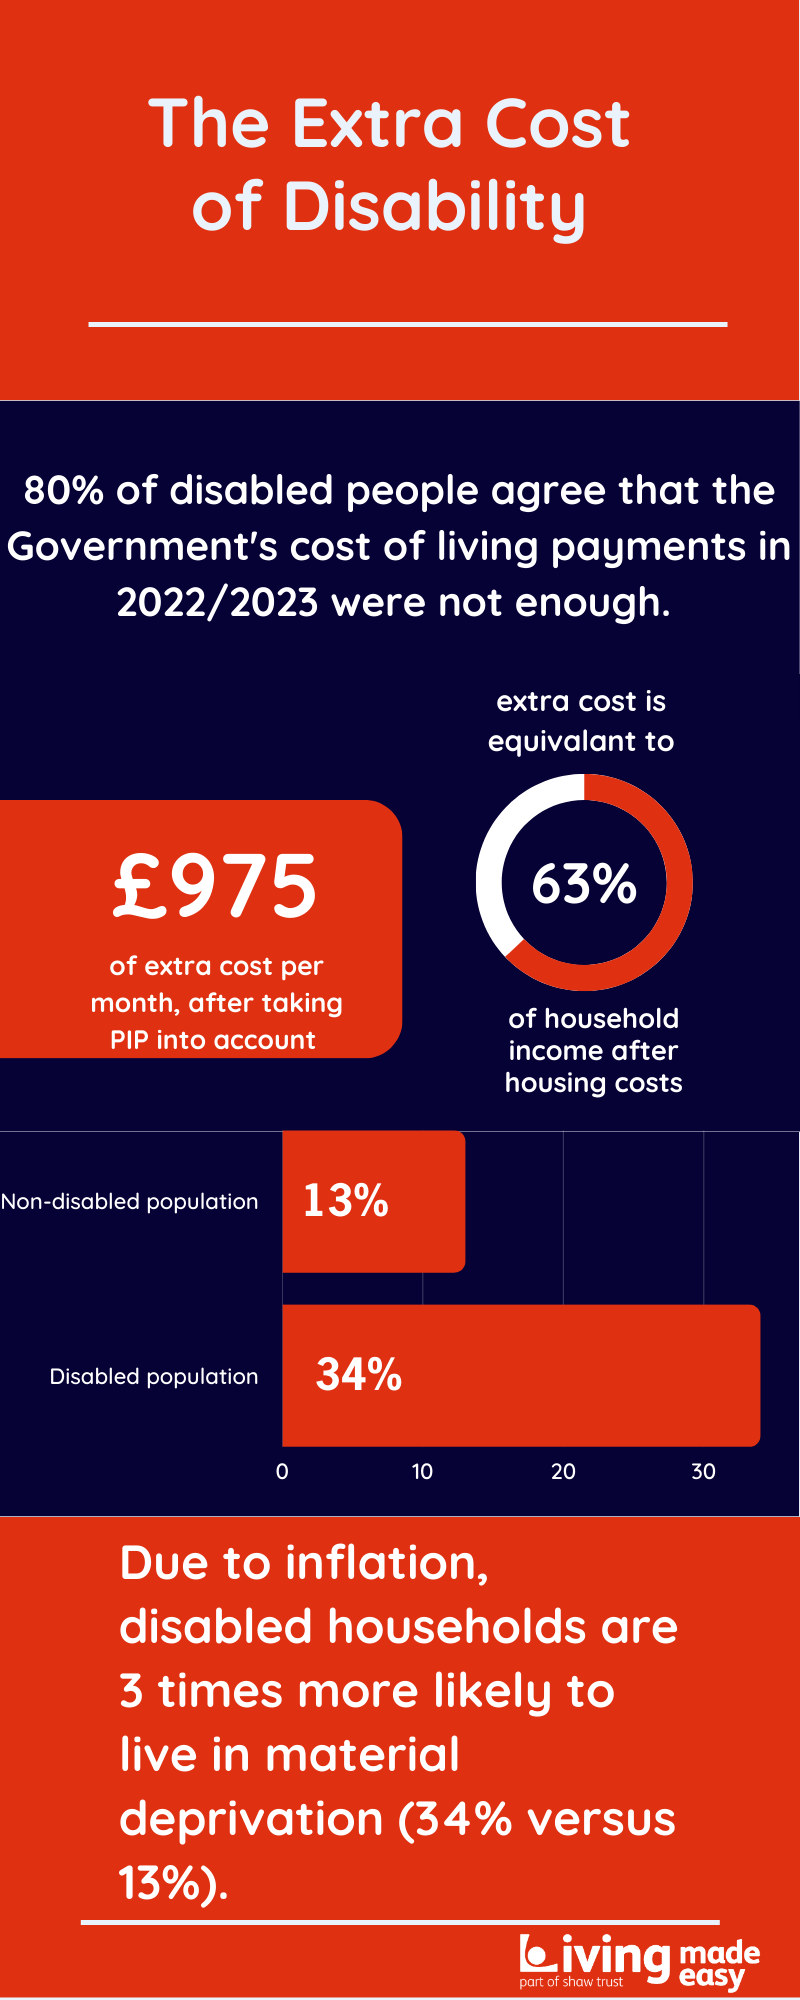 An infographic detailing the extra cost of disability as discussed within the body of the article.